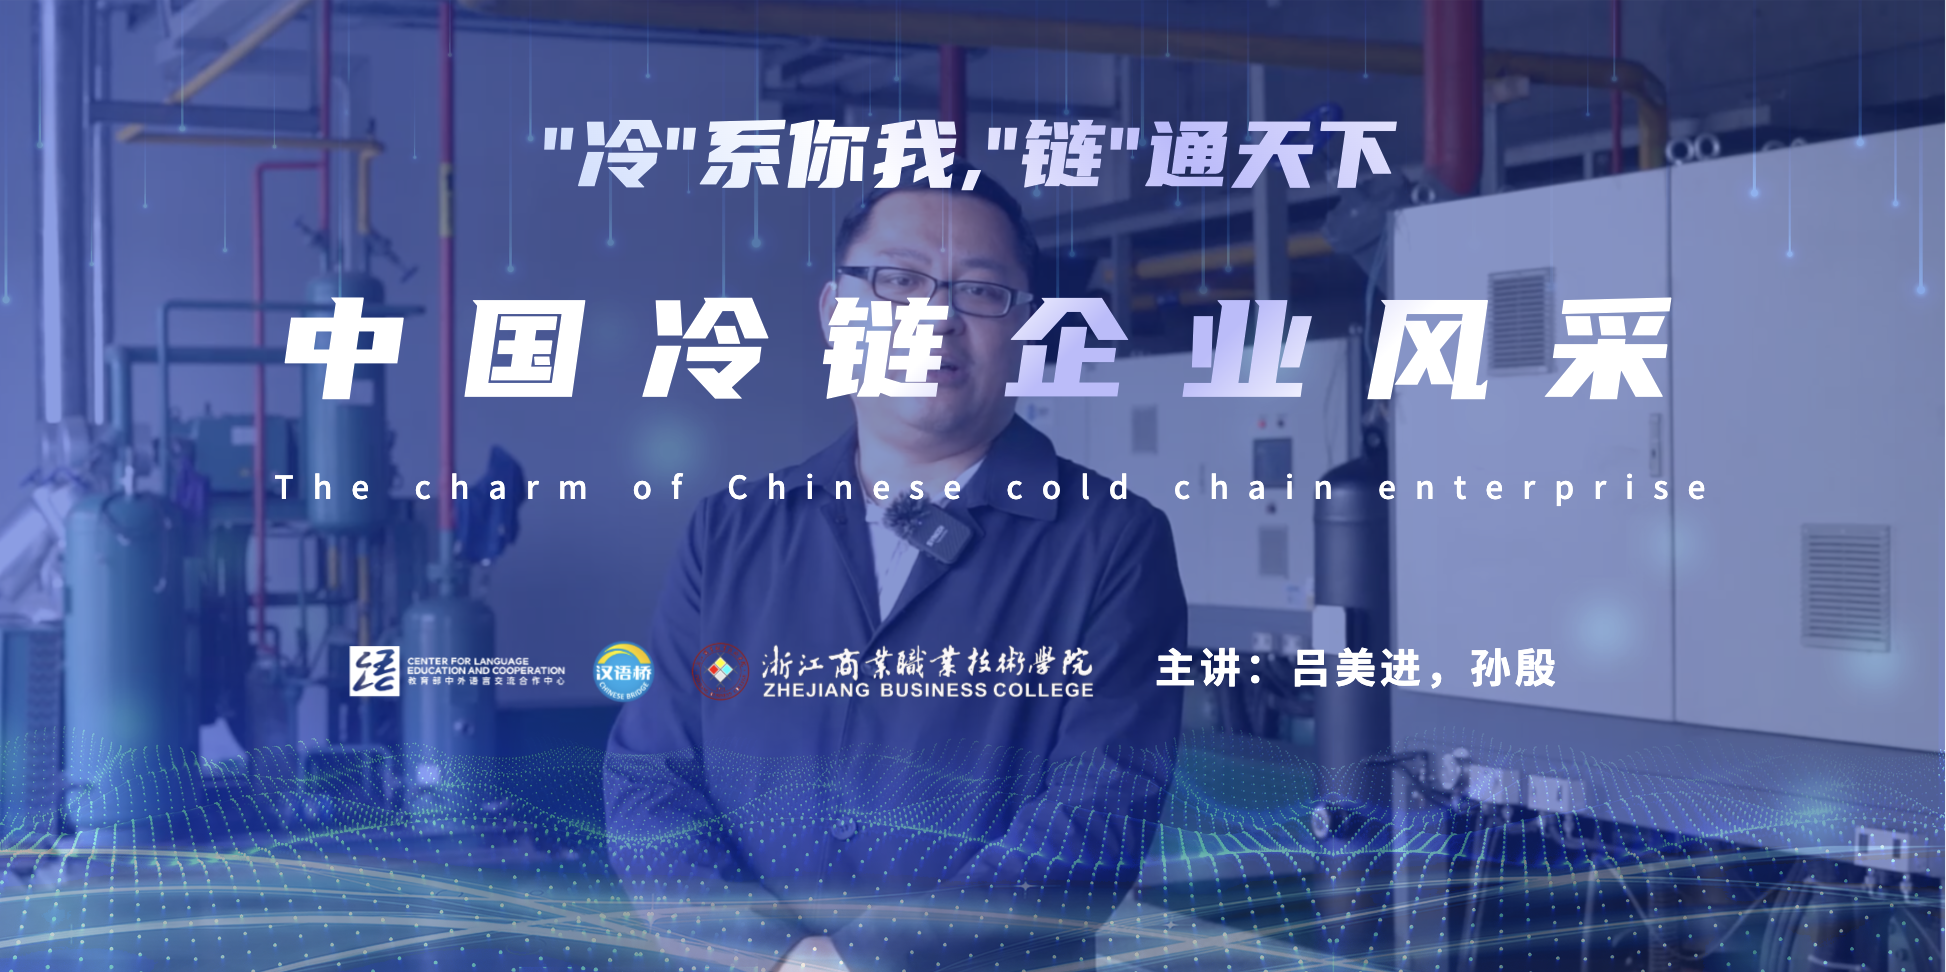 The charm of Chinese cold chain enterprise